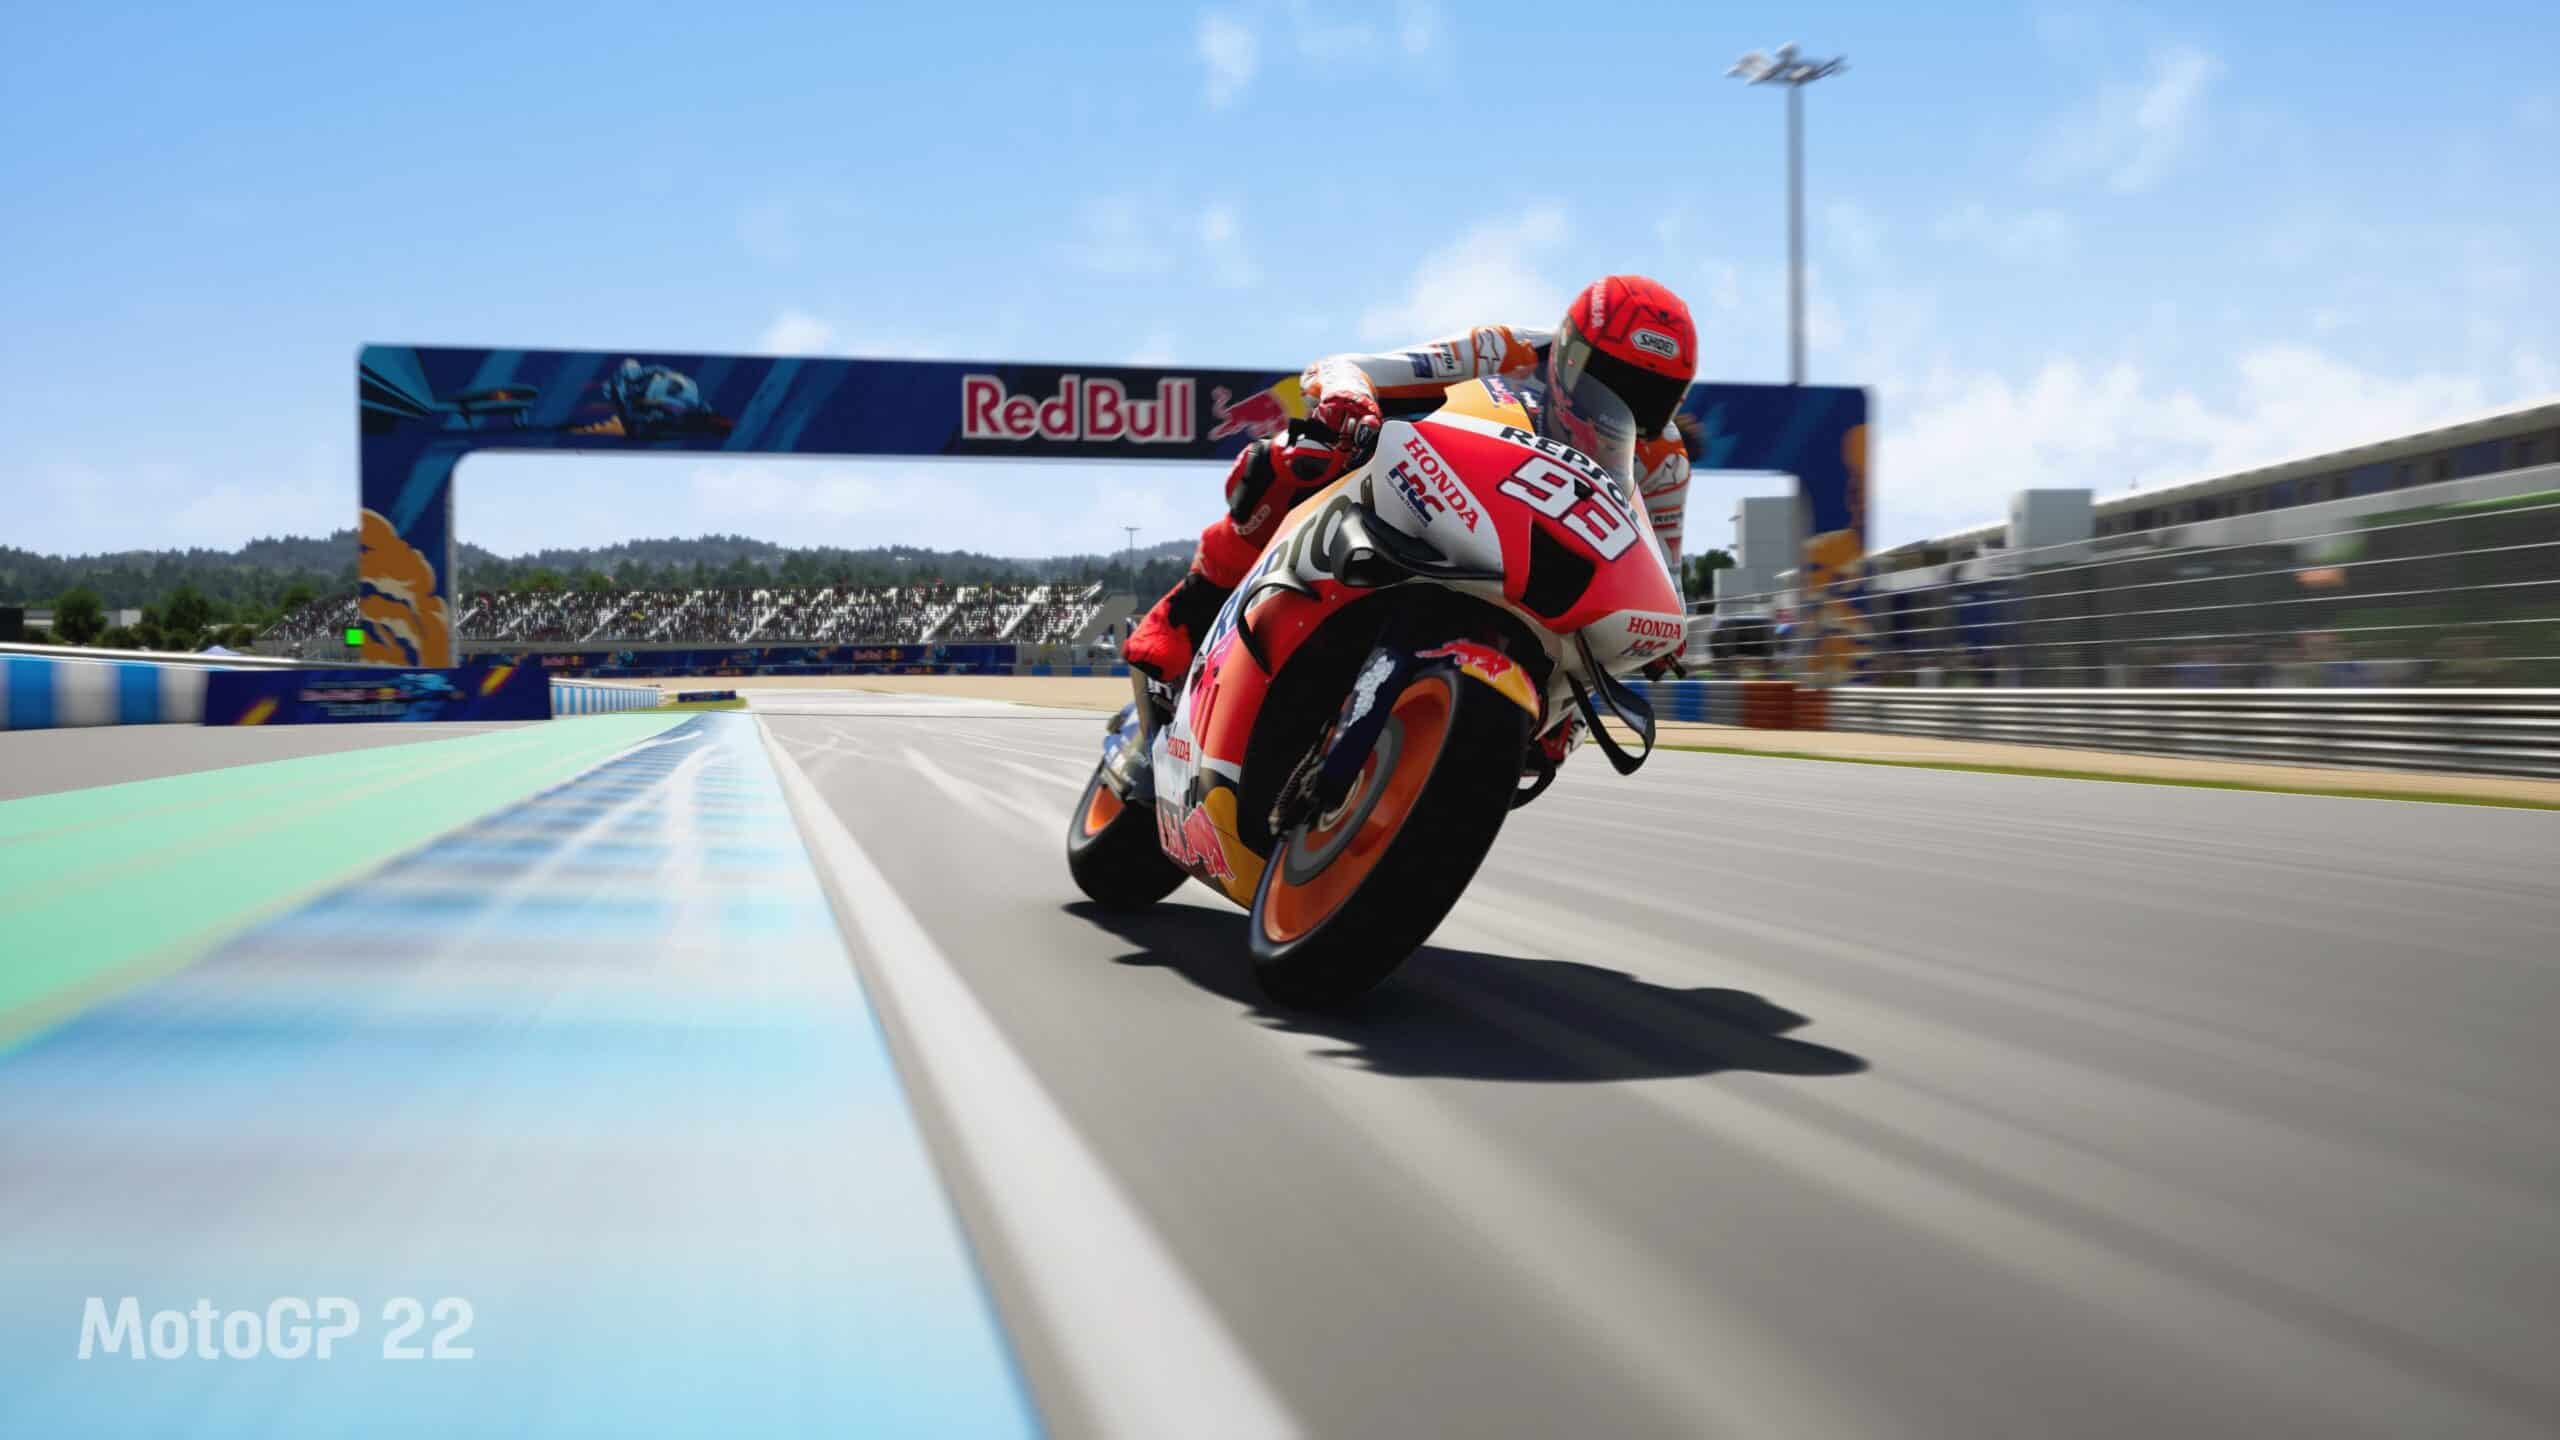 The 2022 motorcycles and liveries are now in the MotoGP 22 game Traxion